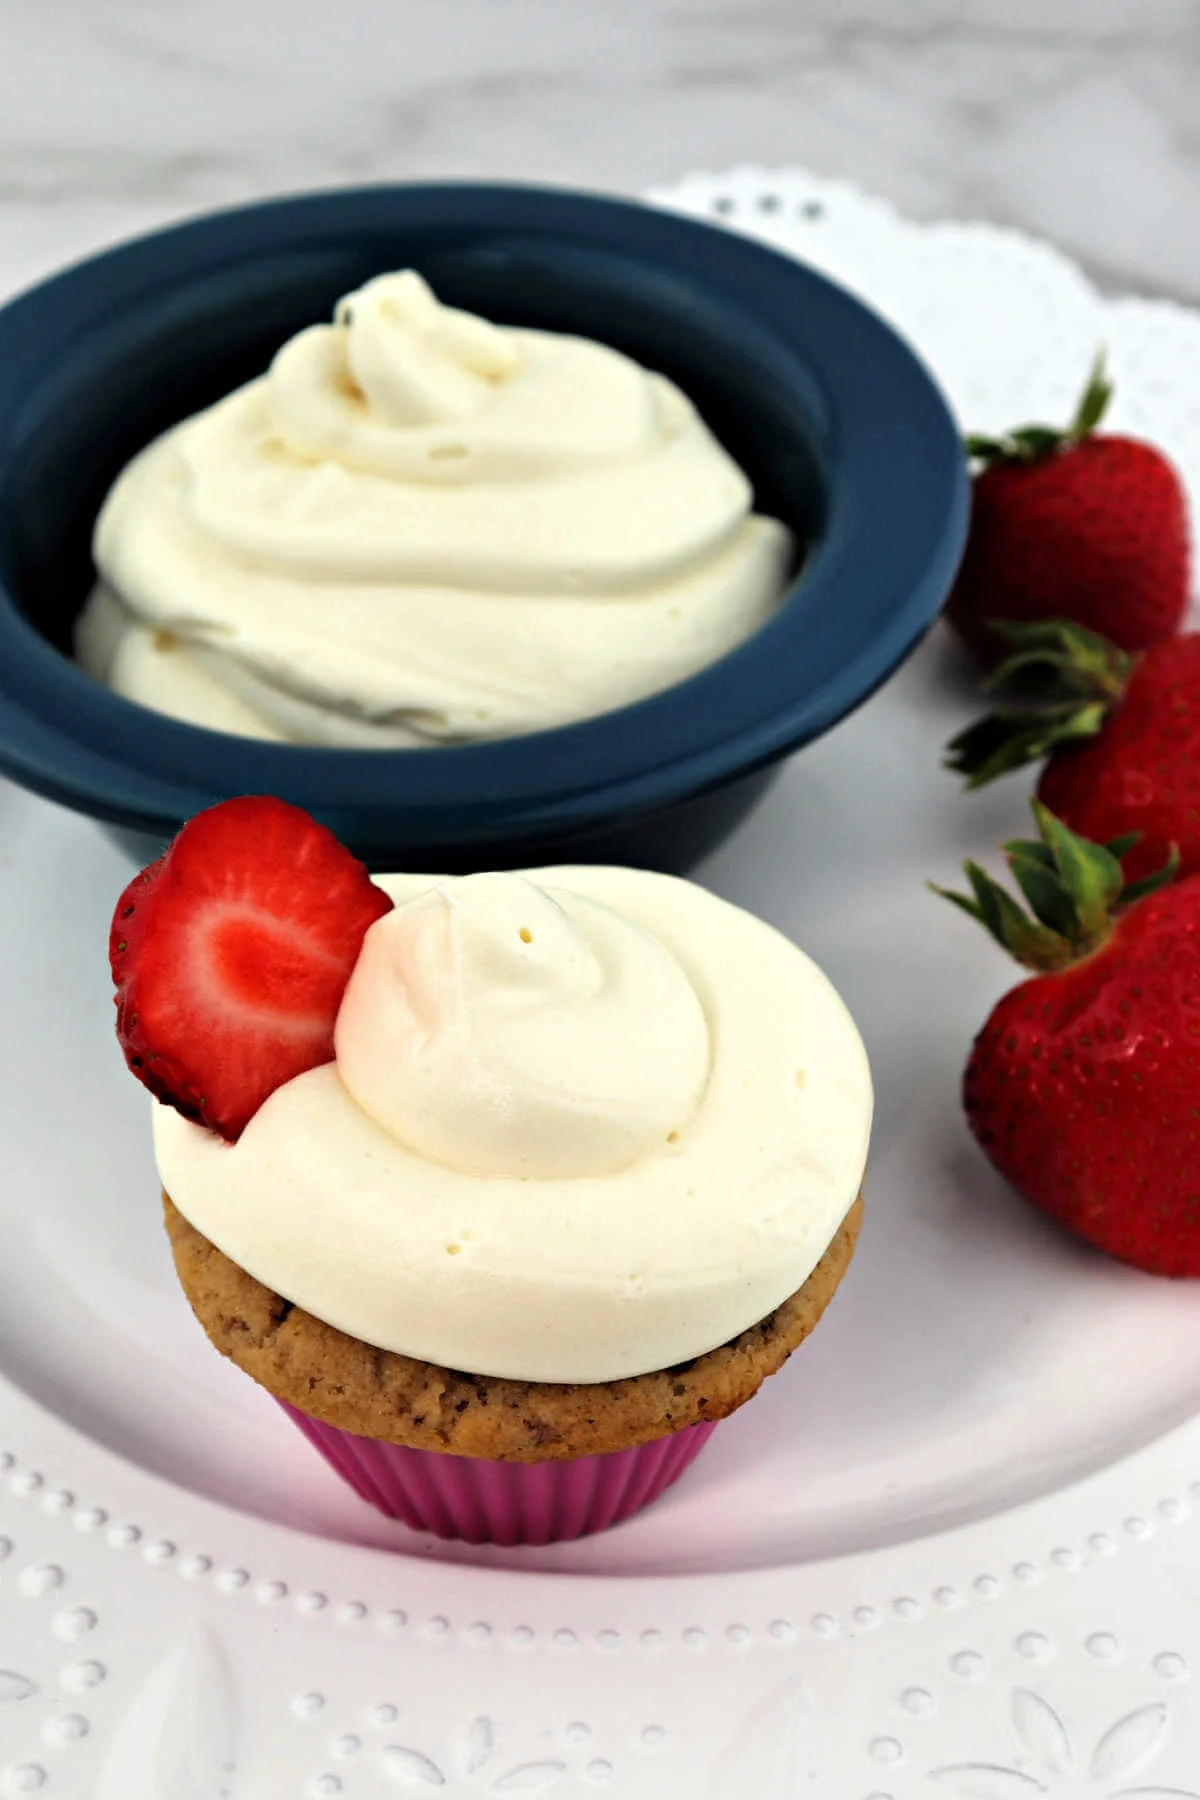 Keto cream cheese frosting on a strawberry cupcake and in a bowl.